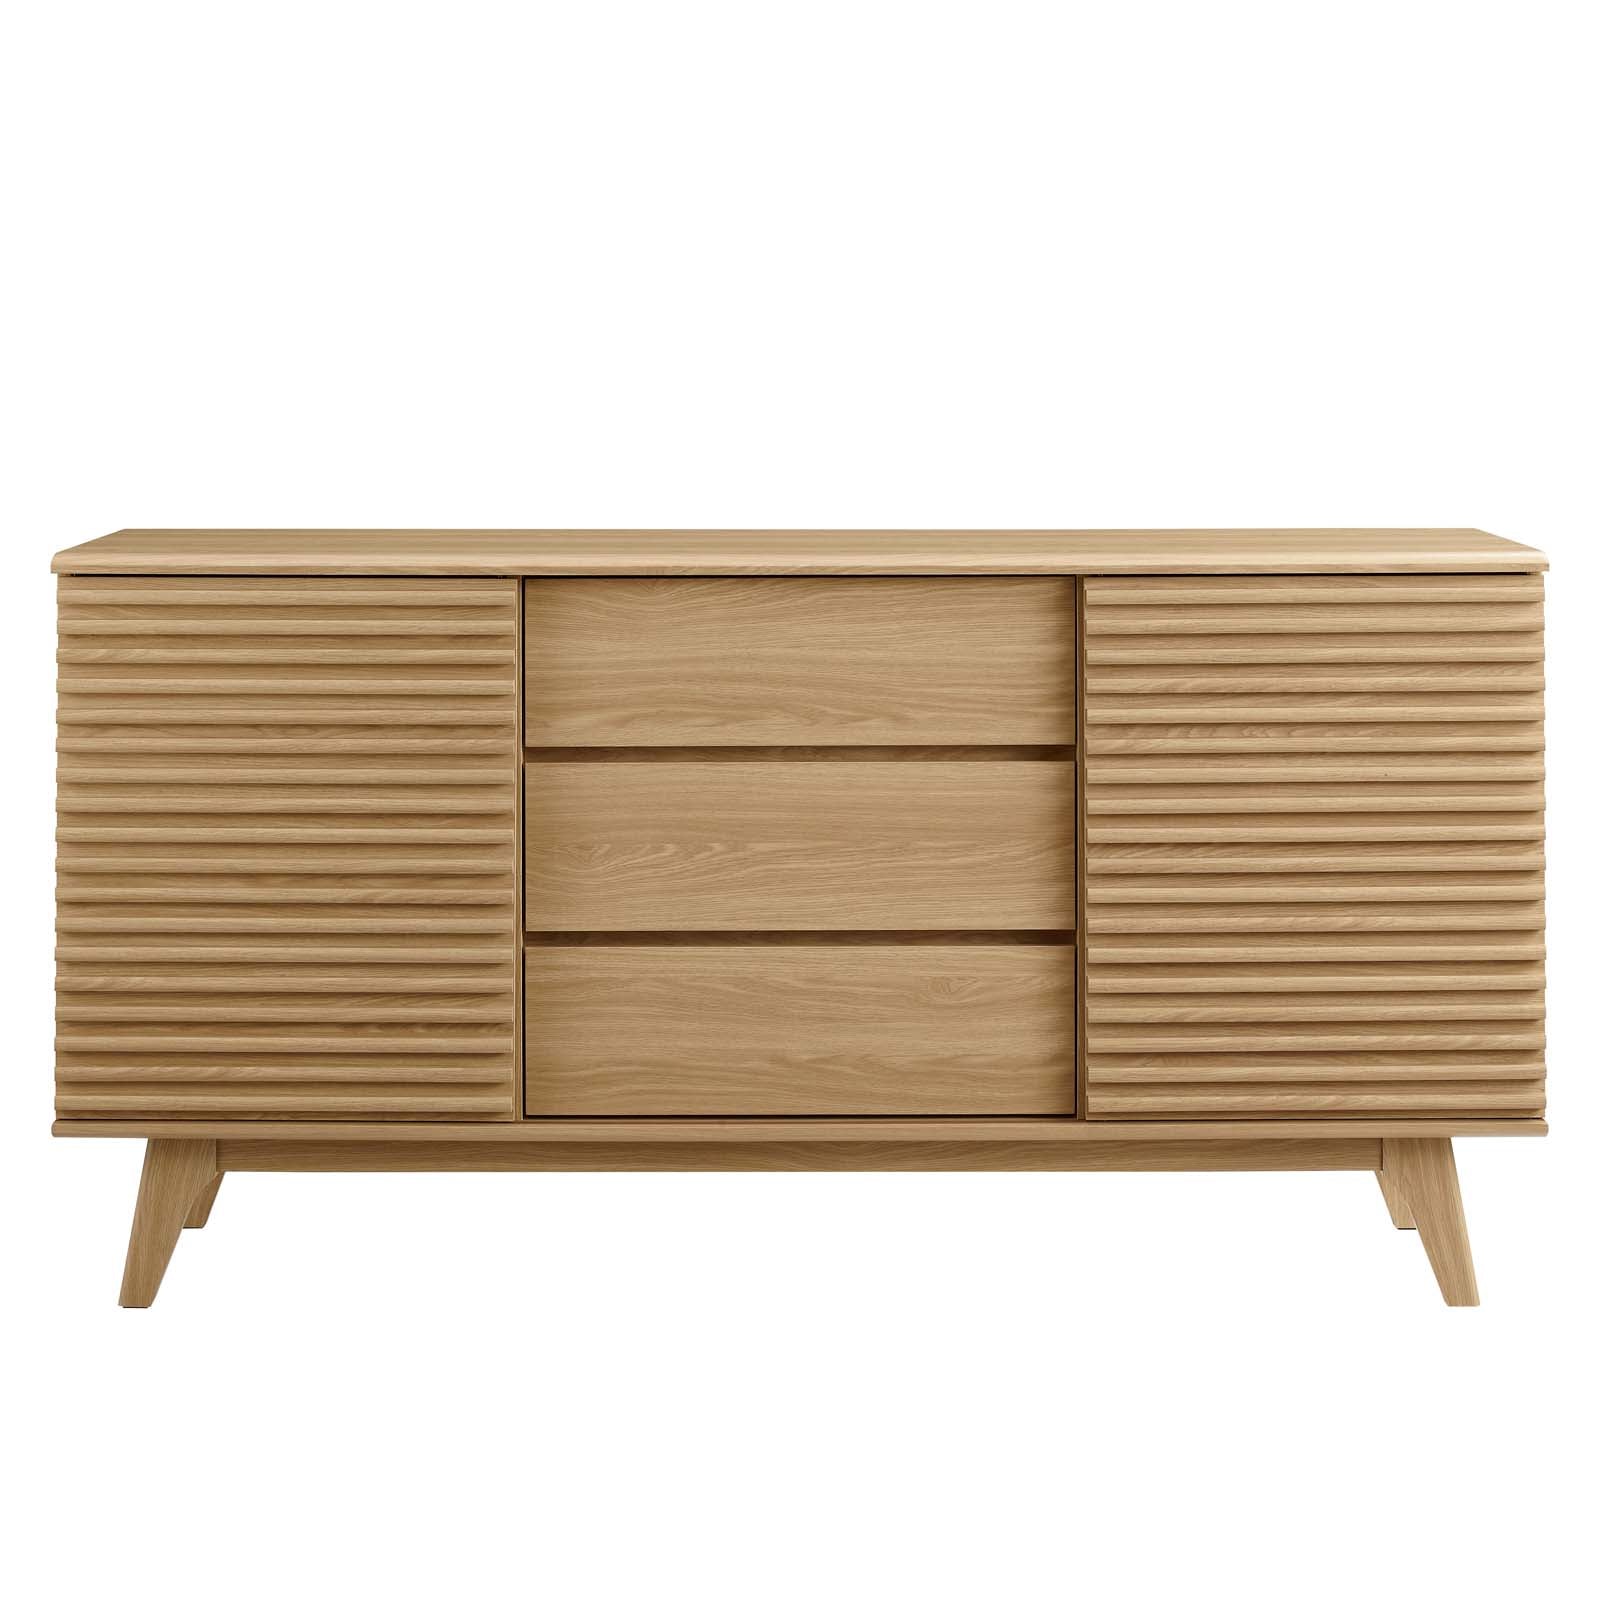 Render 63" Sideboard Buffet Table or TV Stand - East Shore Modern Home Furnishings